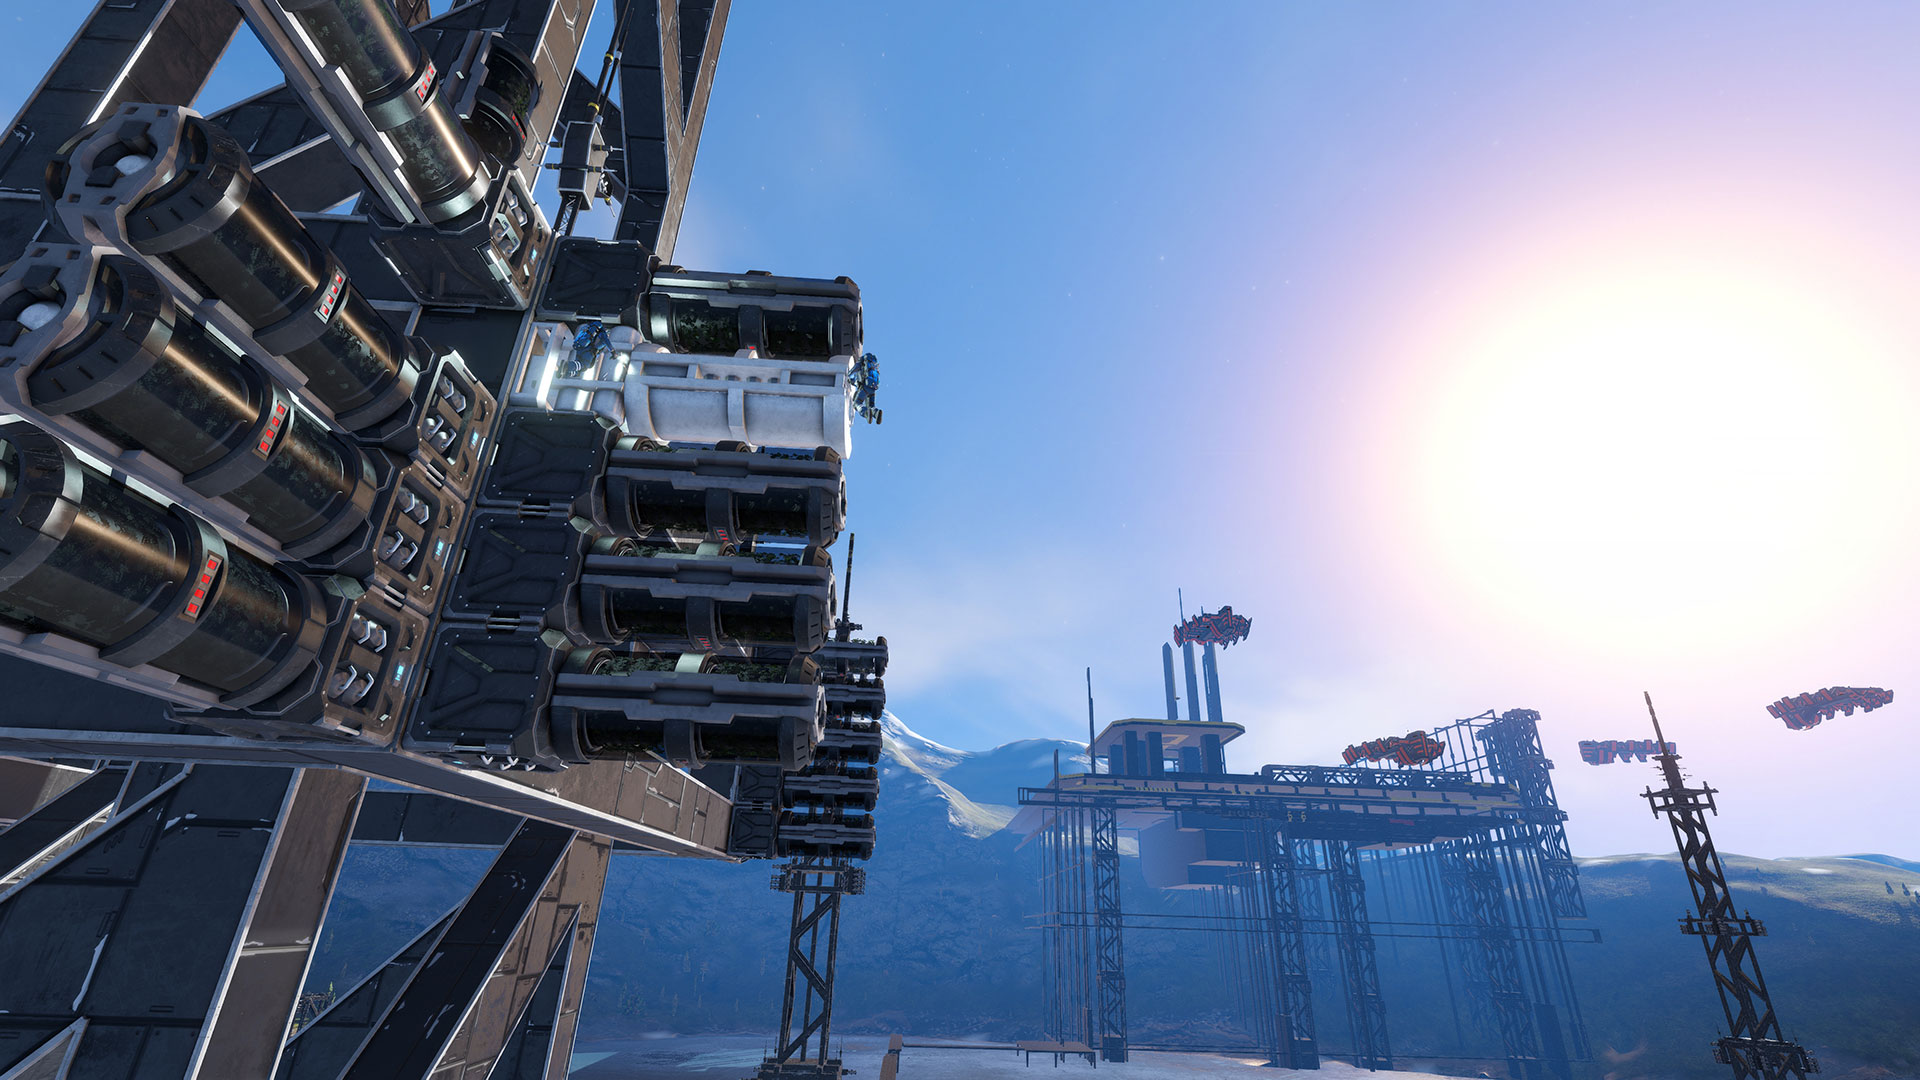 HD desktop wallpaper of Space Engineers game showing futuristic space construction and machinery with a sunlit background.